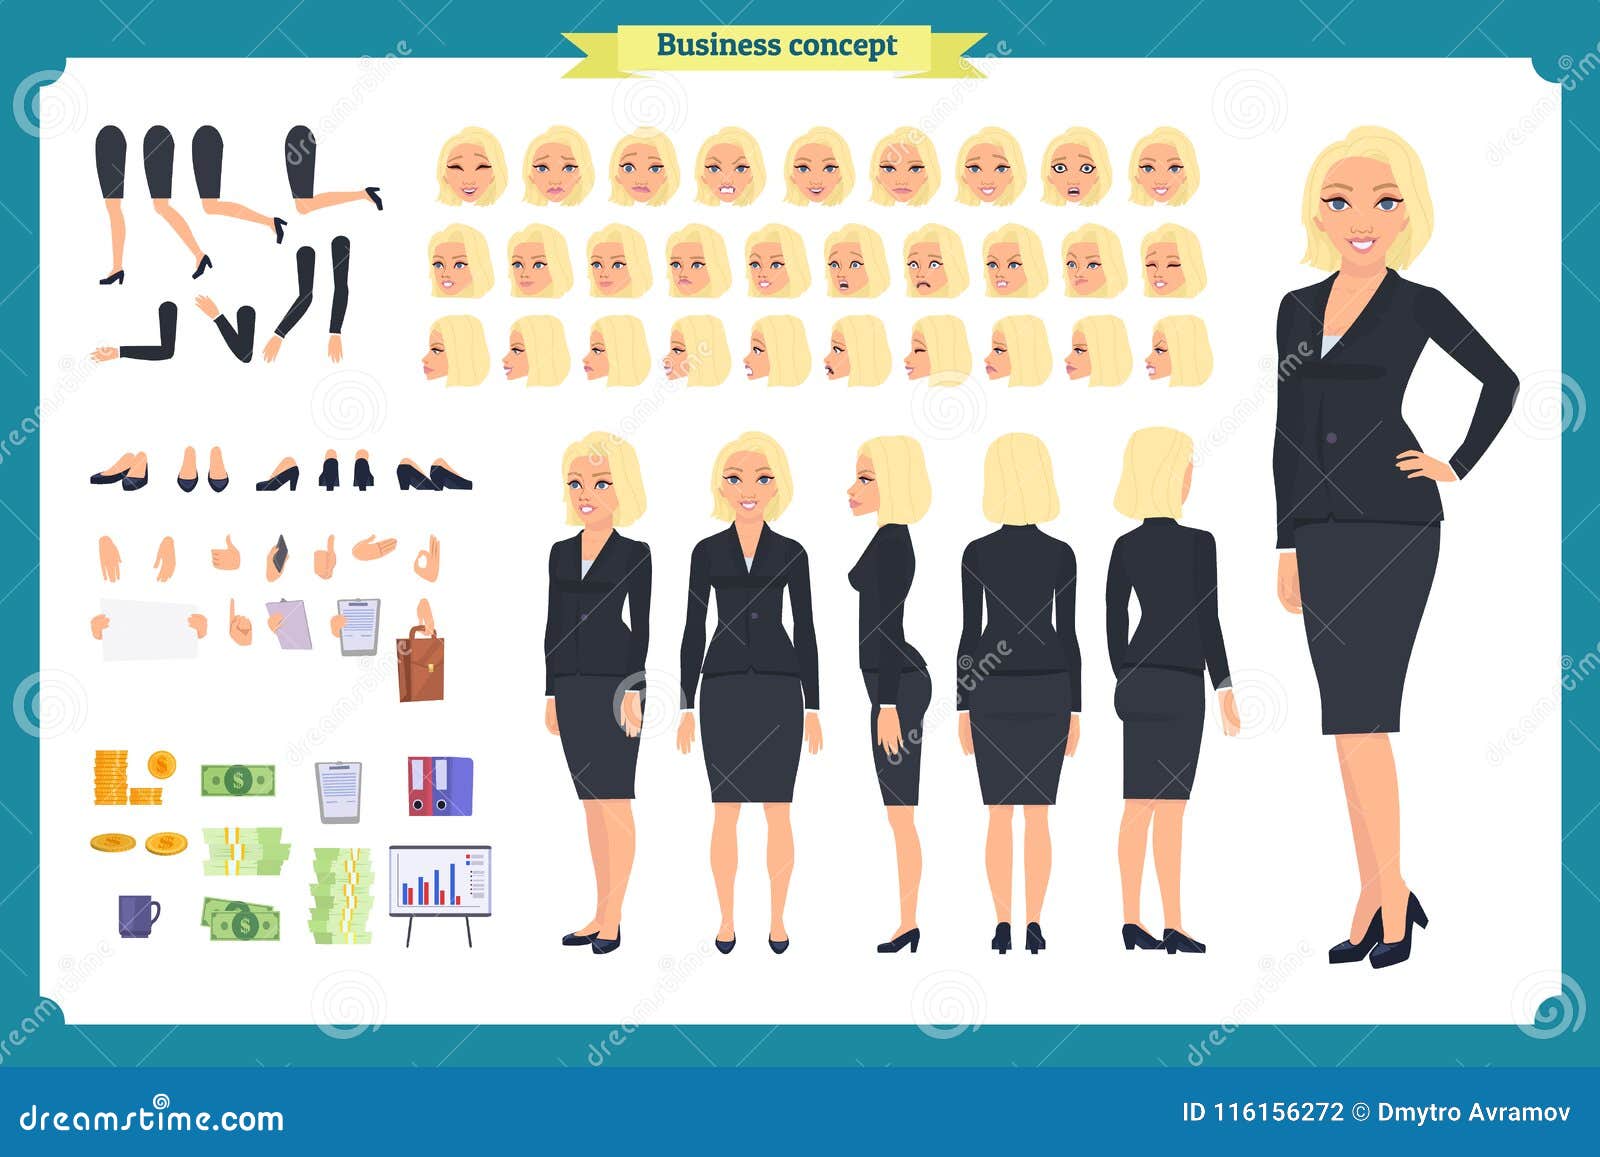 set of businesswoman character .front, side, back view animated character. cartoon style, flat  .